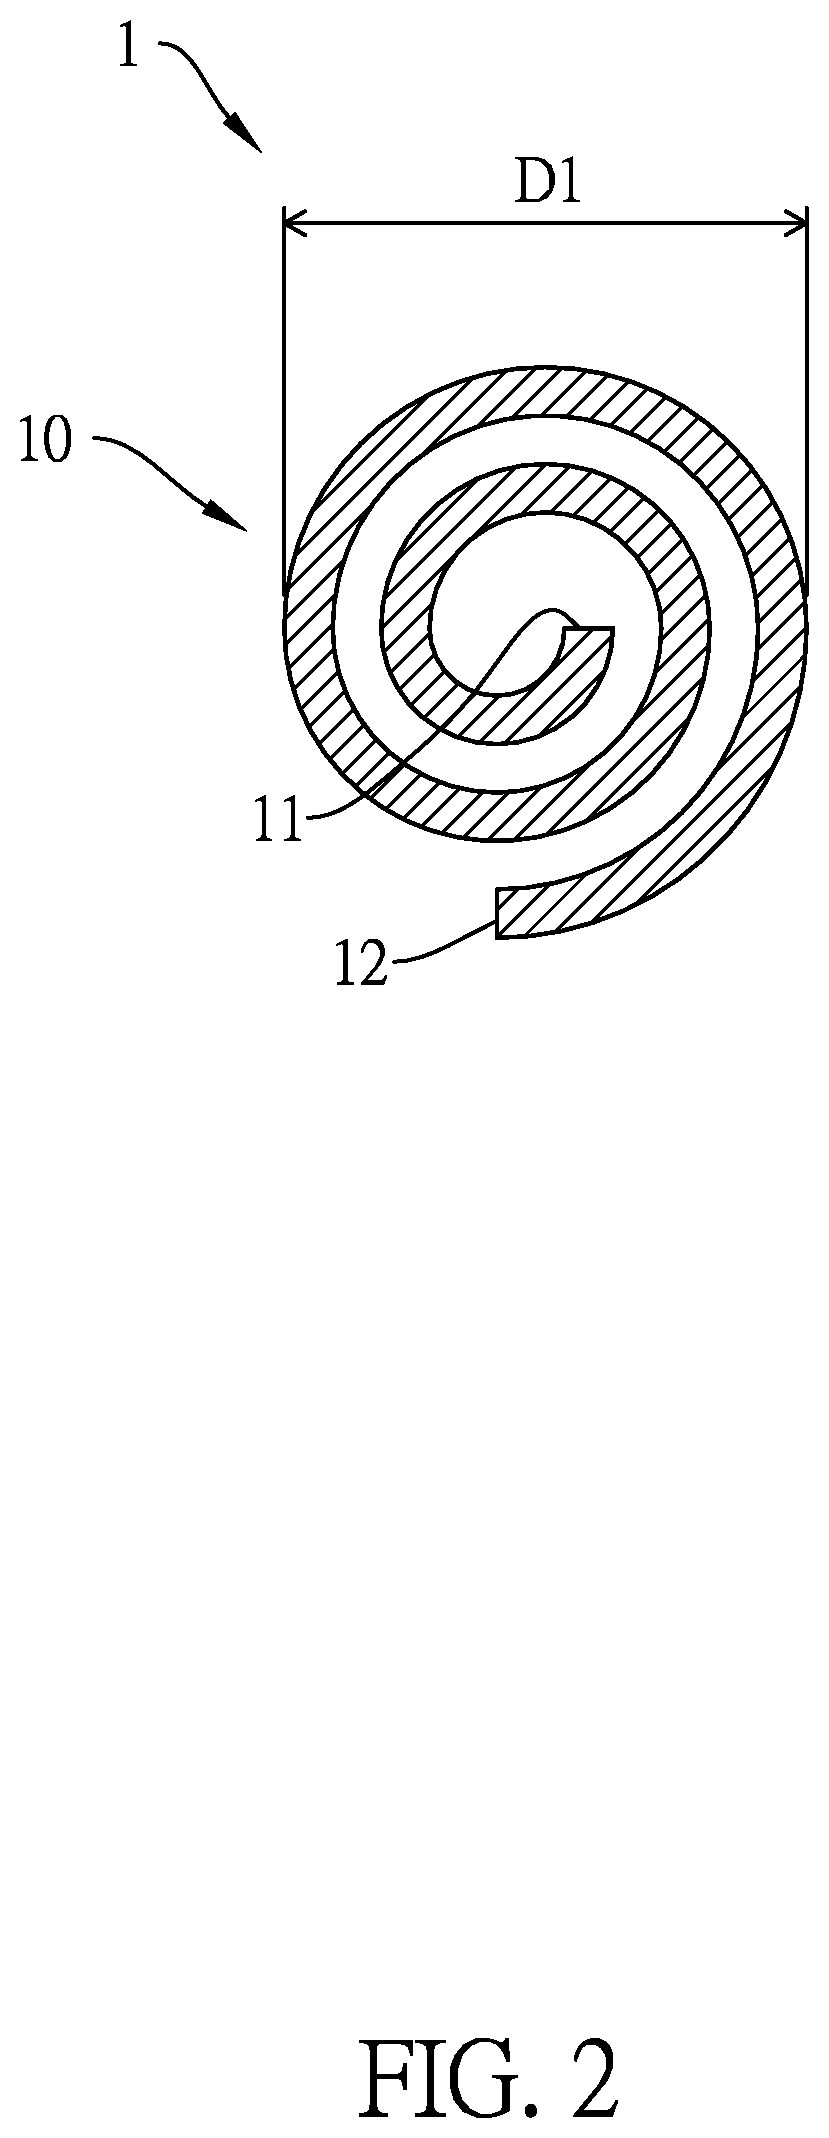 Method for manufacturing rolled retraction cord